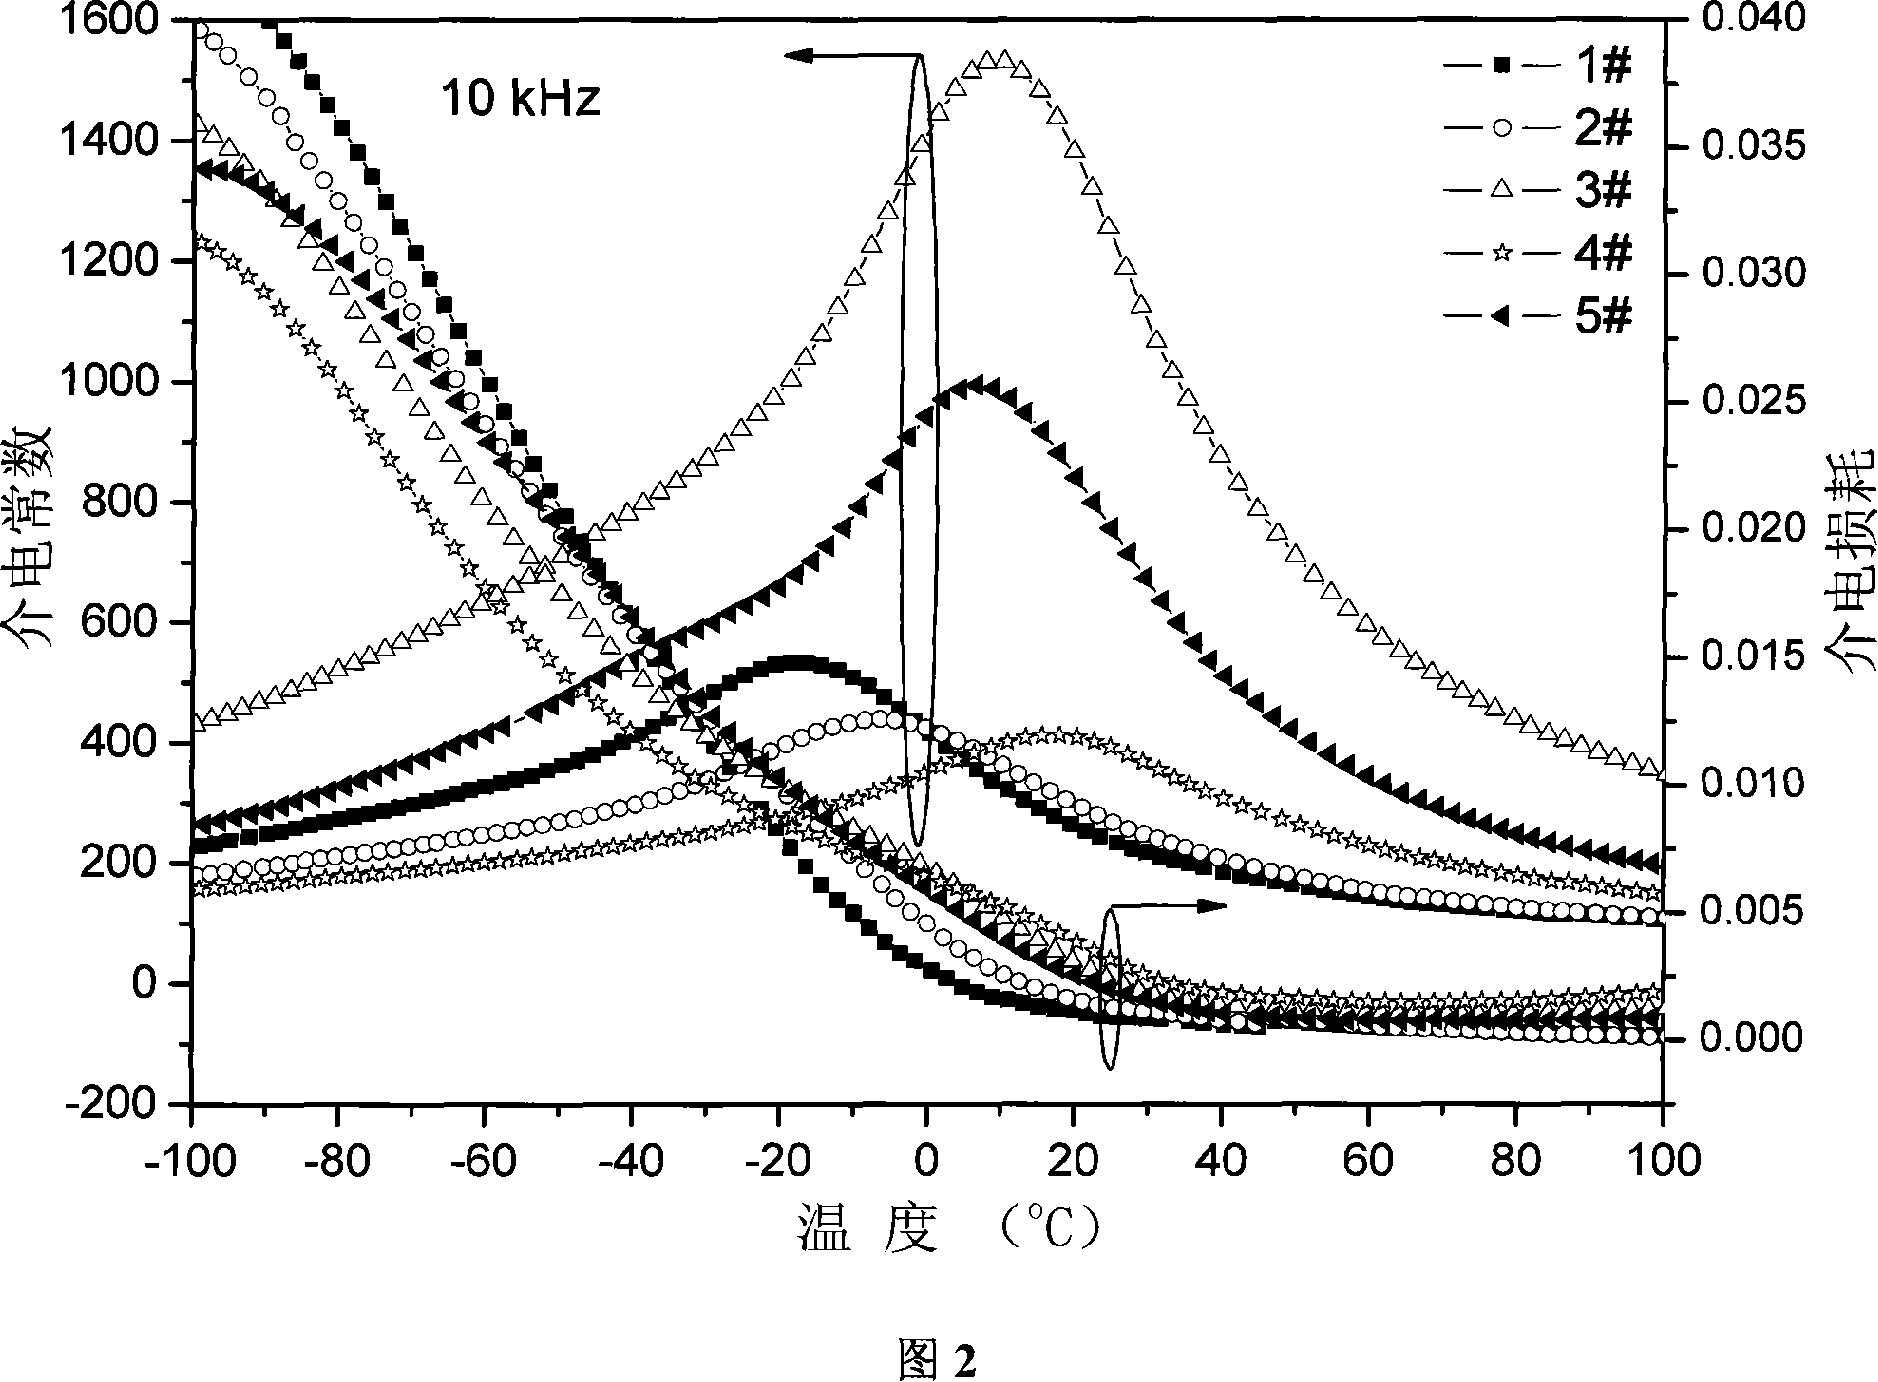 Ba(1-x)SrxTiO3-BaX6Ti6O19(X=Mg, Zn) diphasic composite micro-wave ceramic material and preparation method thereof